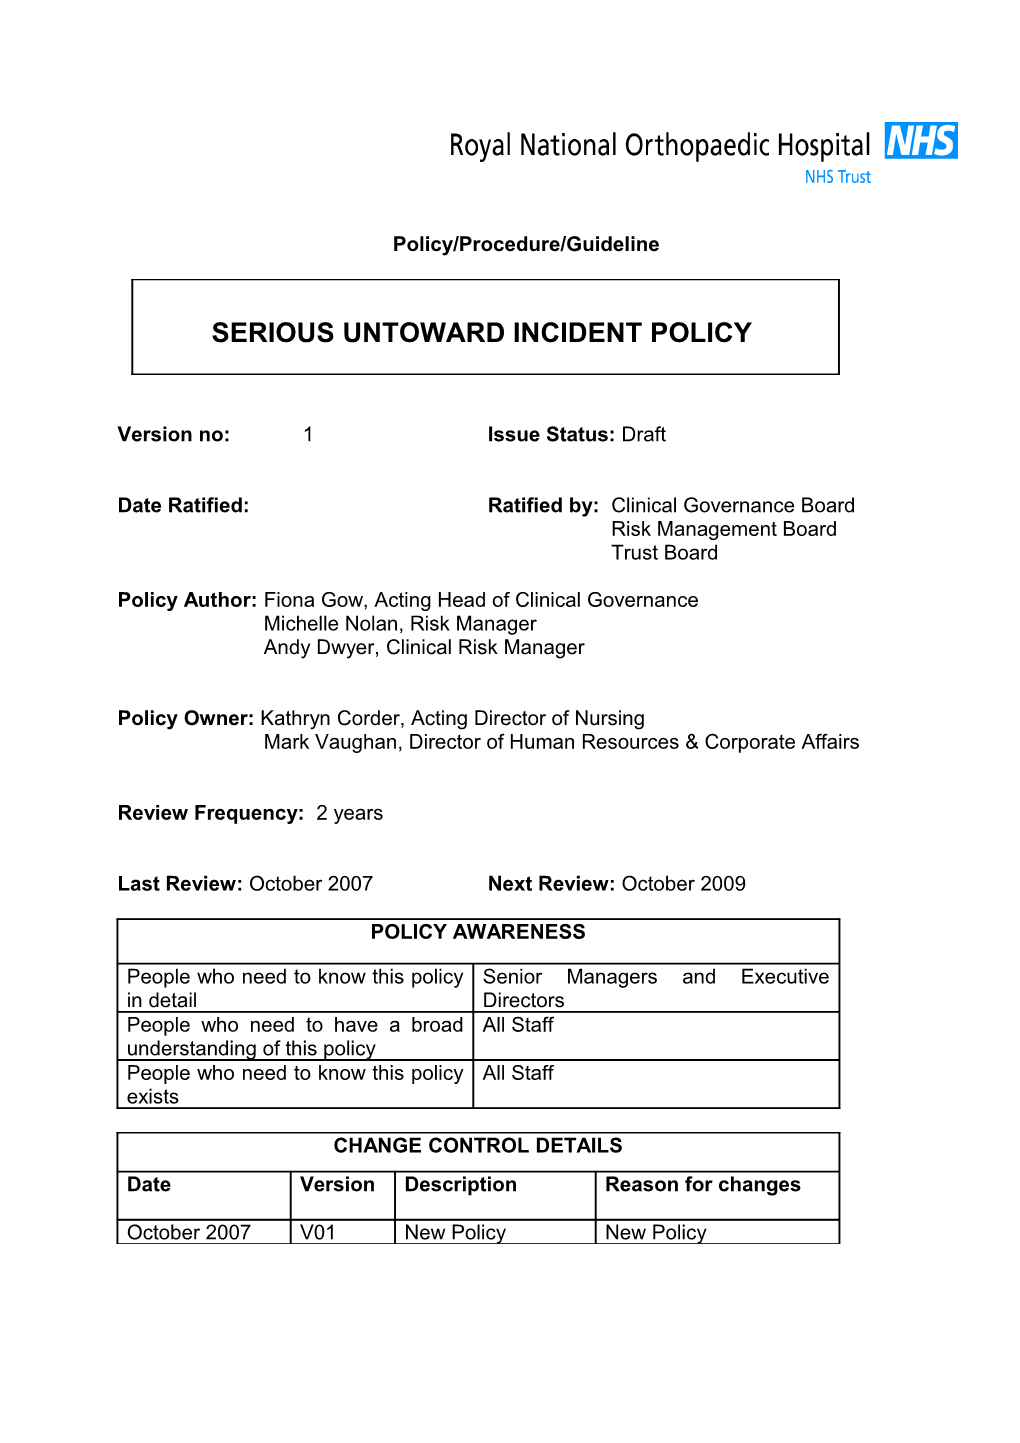 Incident Reporting Policy